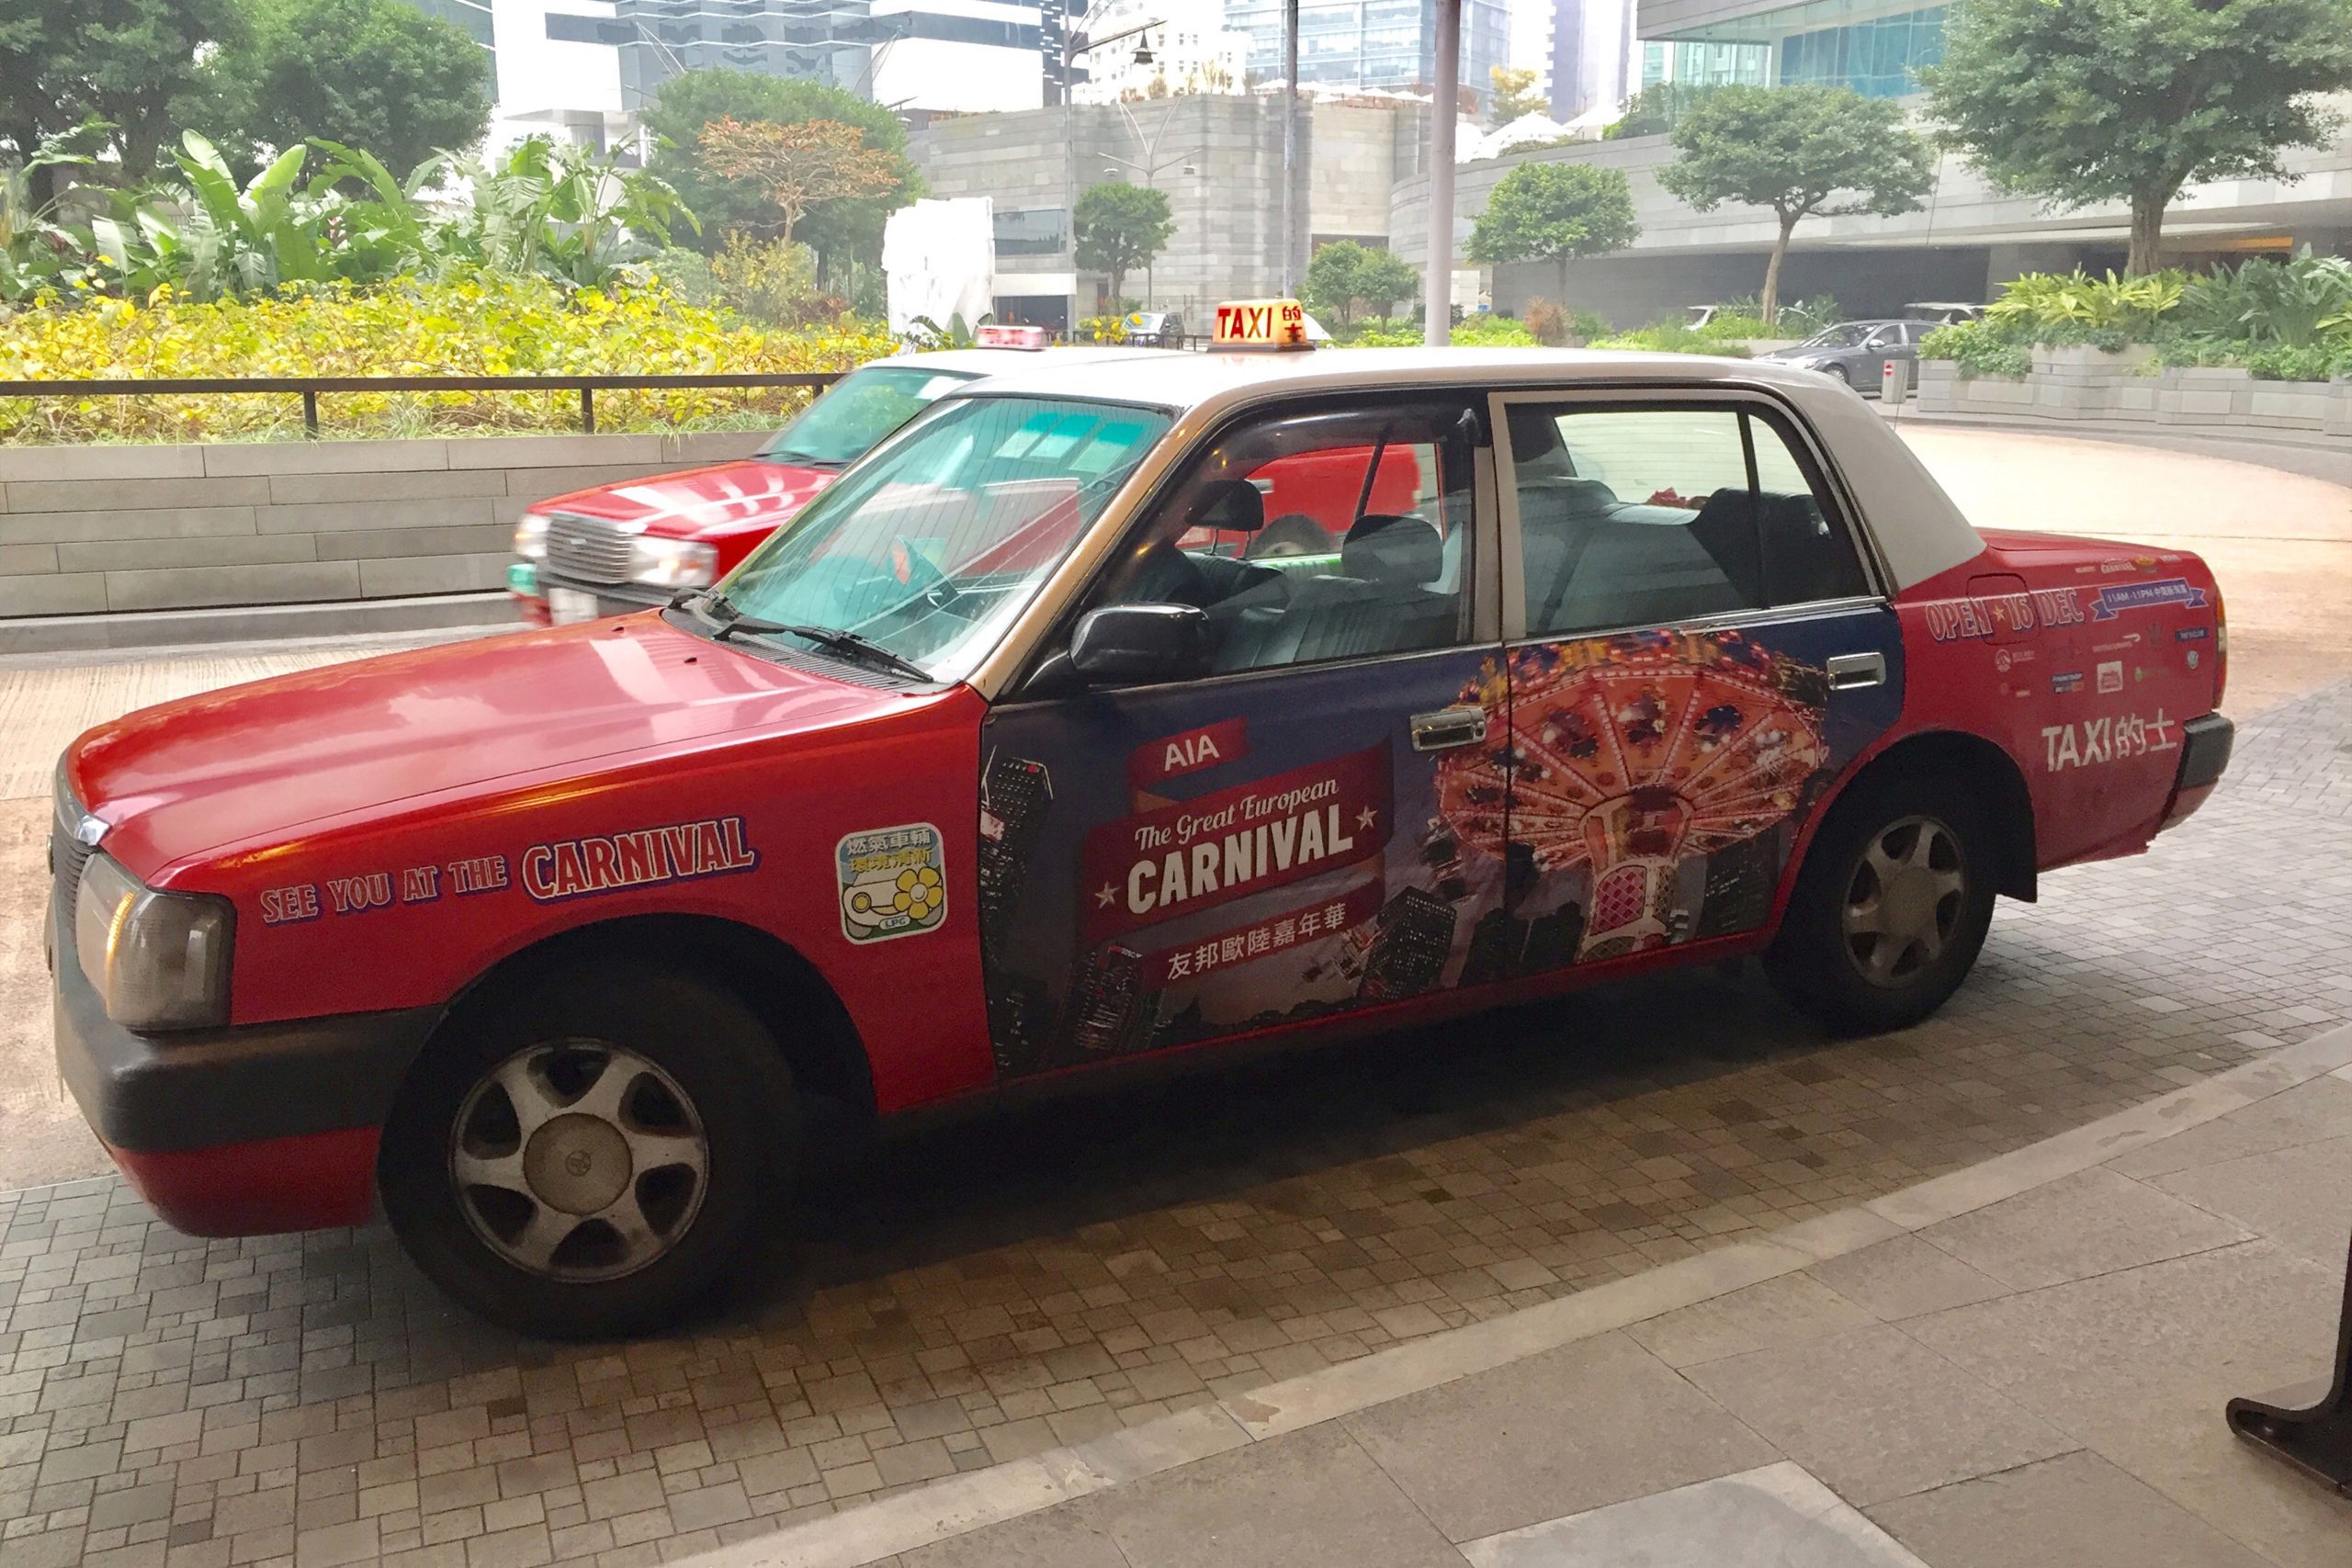 AIA Carnival Hong Kong Event Promotion On Taxi